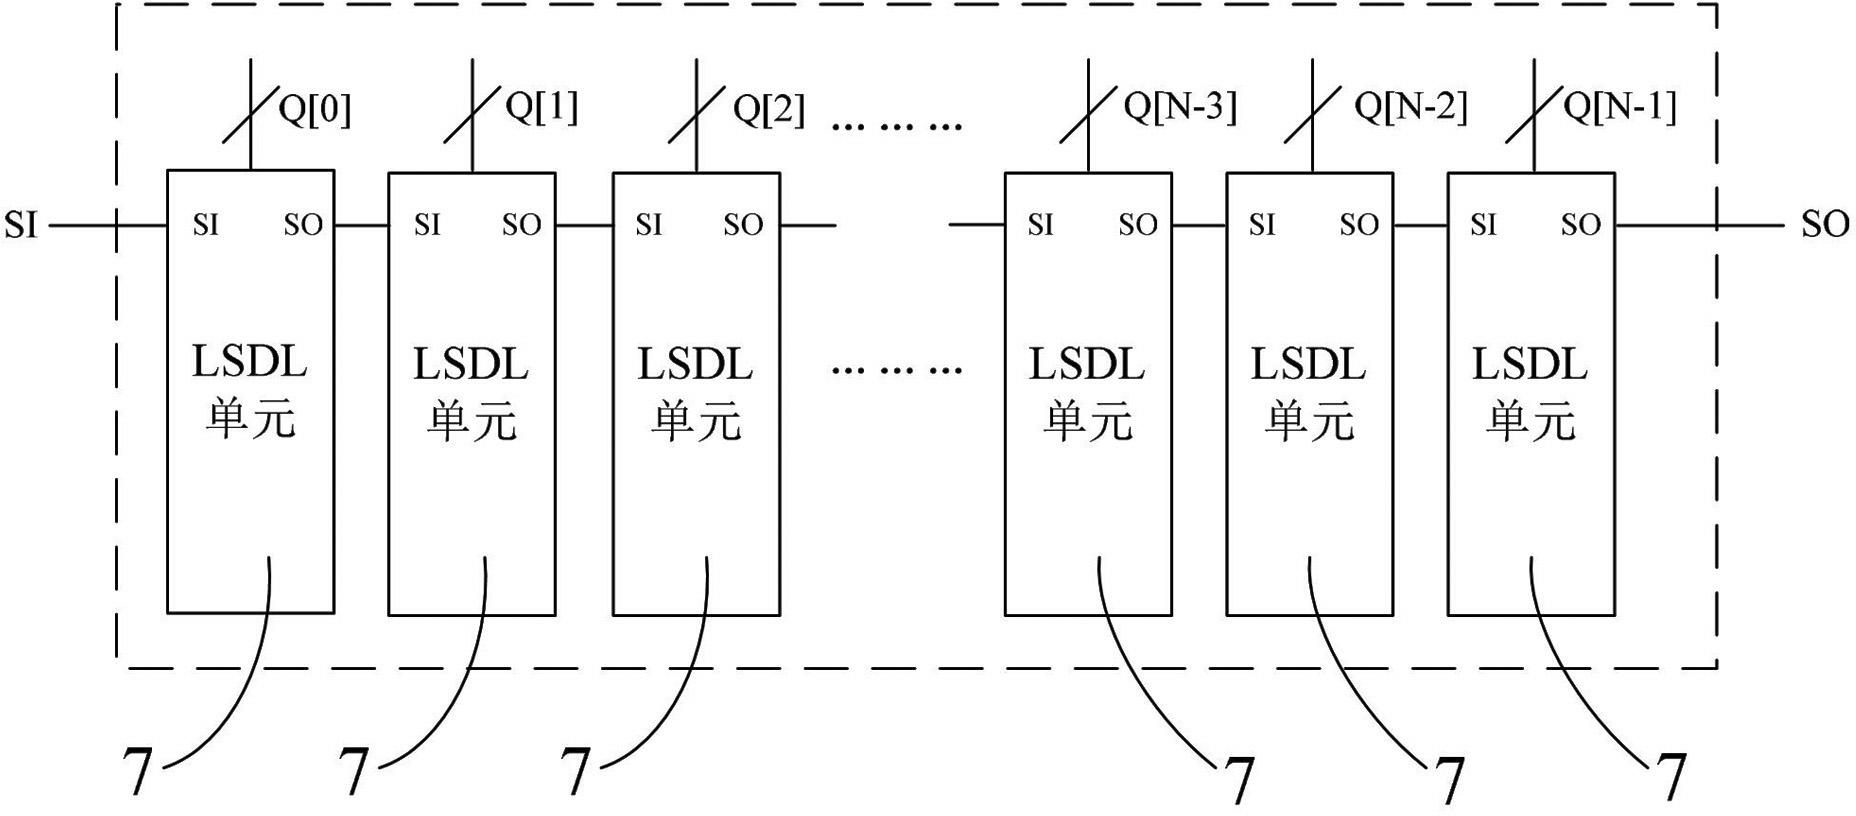 Limited overturning dynamic logic circuit with scanning function